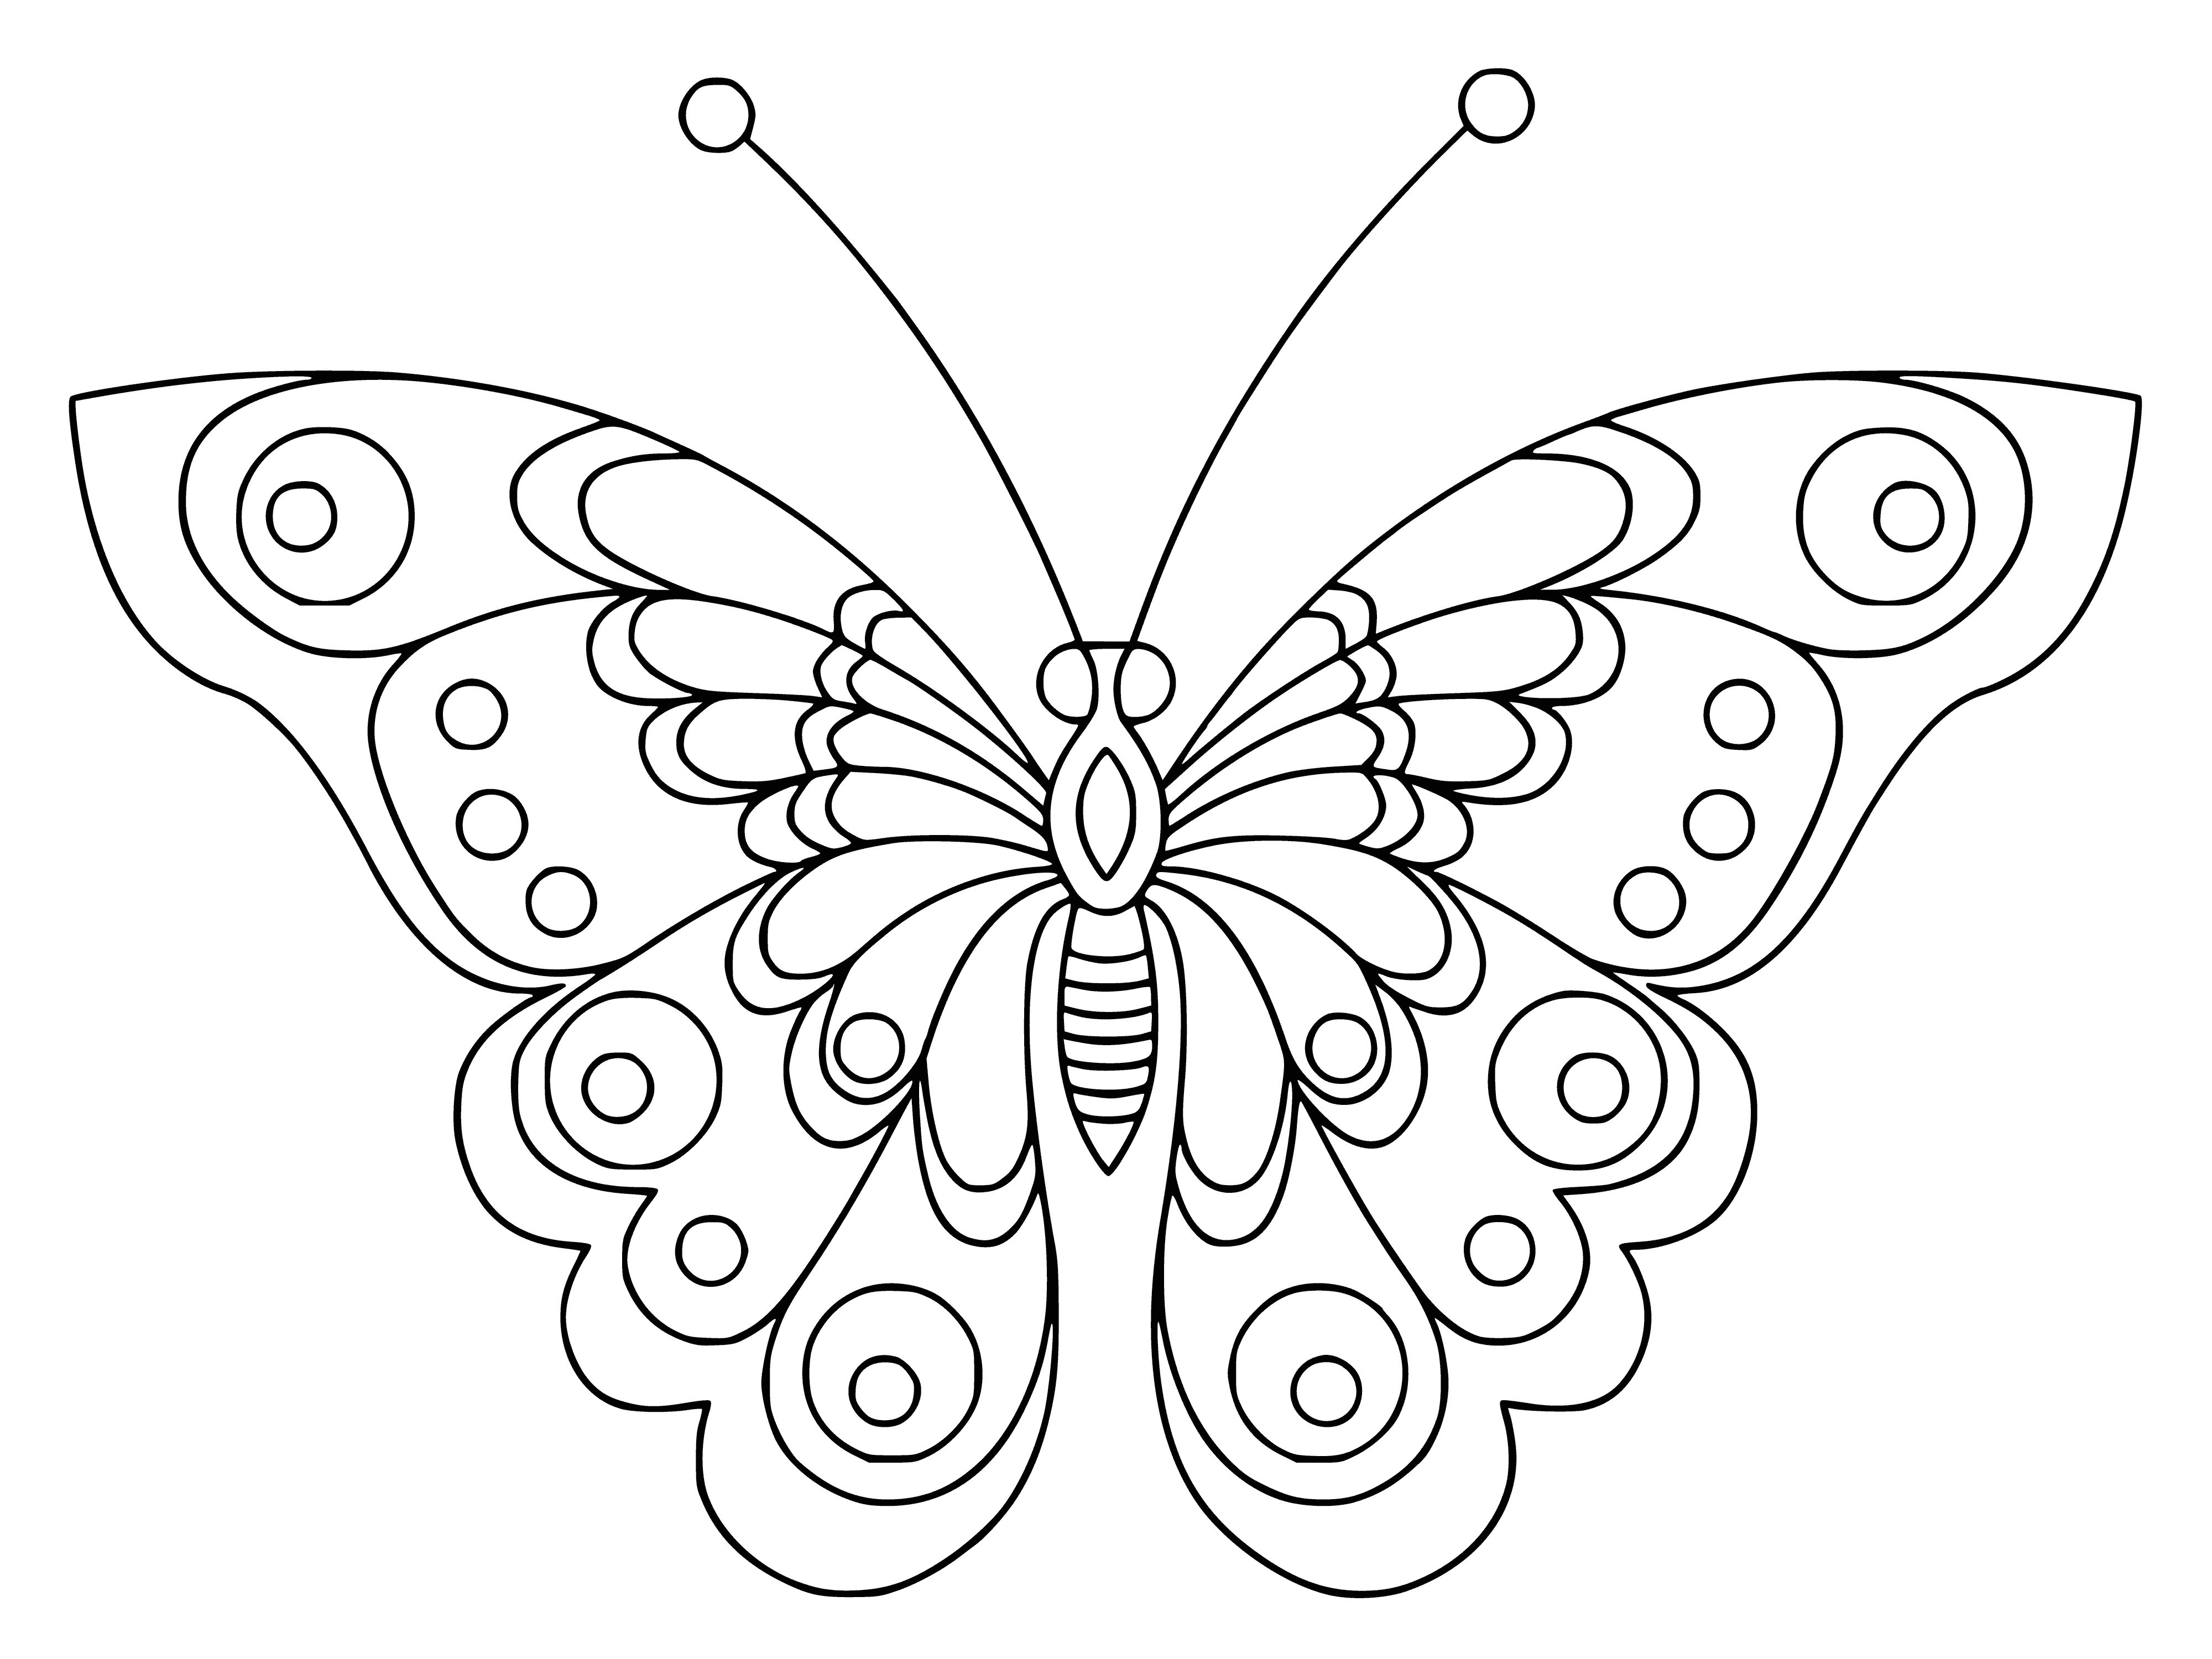 coloring page: Two butterflies with light brown colors, spots of 2 dots and comma shape, wings open/closed, long thin body & 6 thin legs.